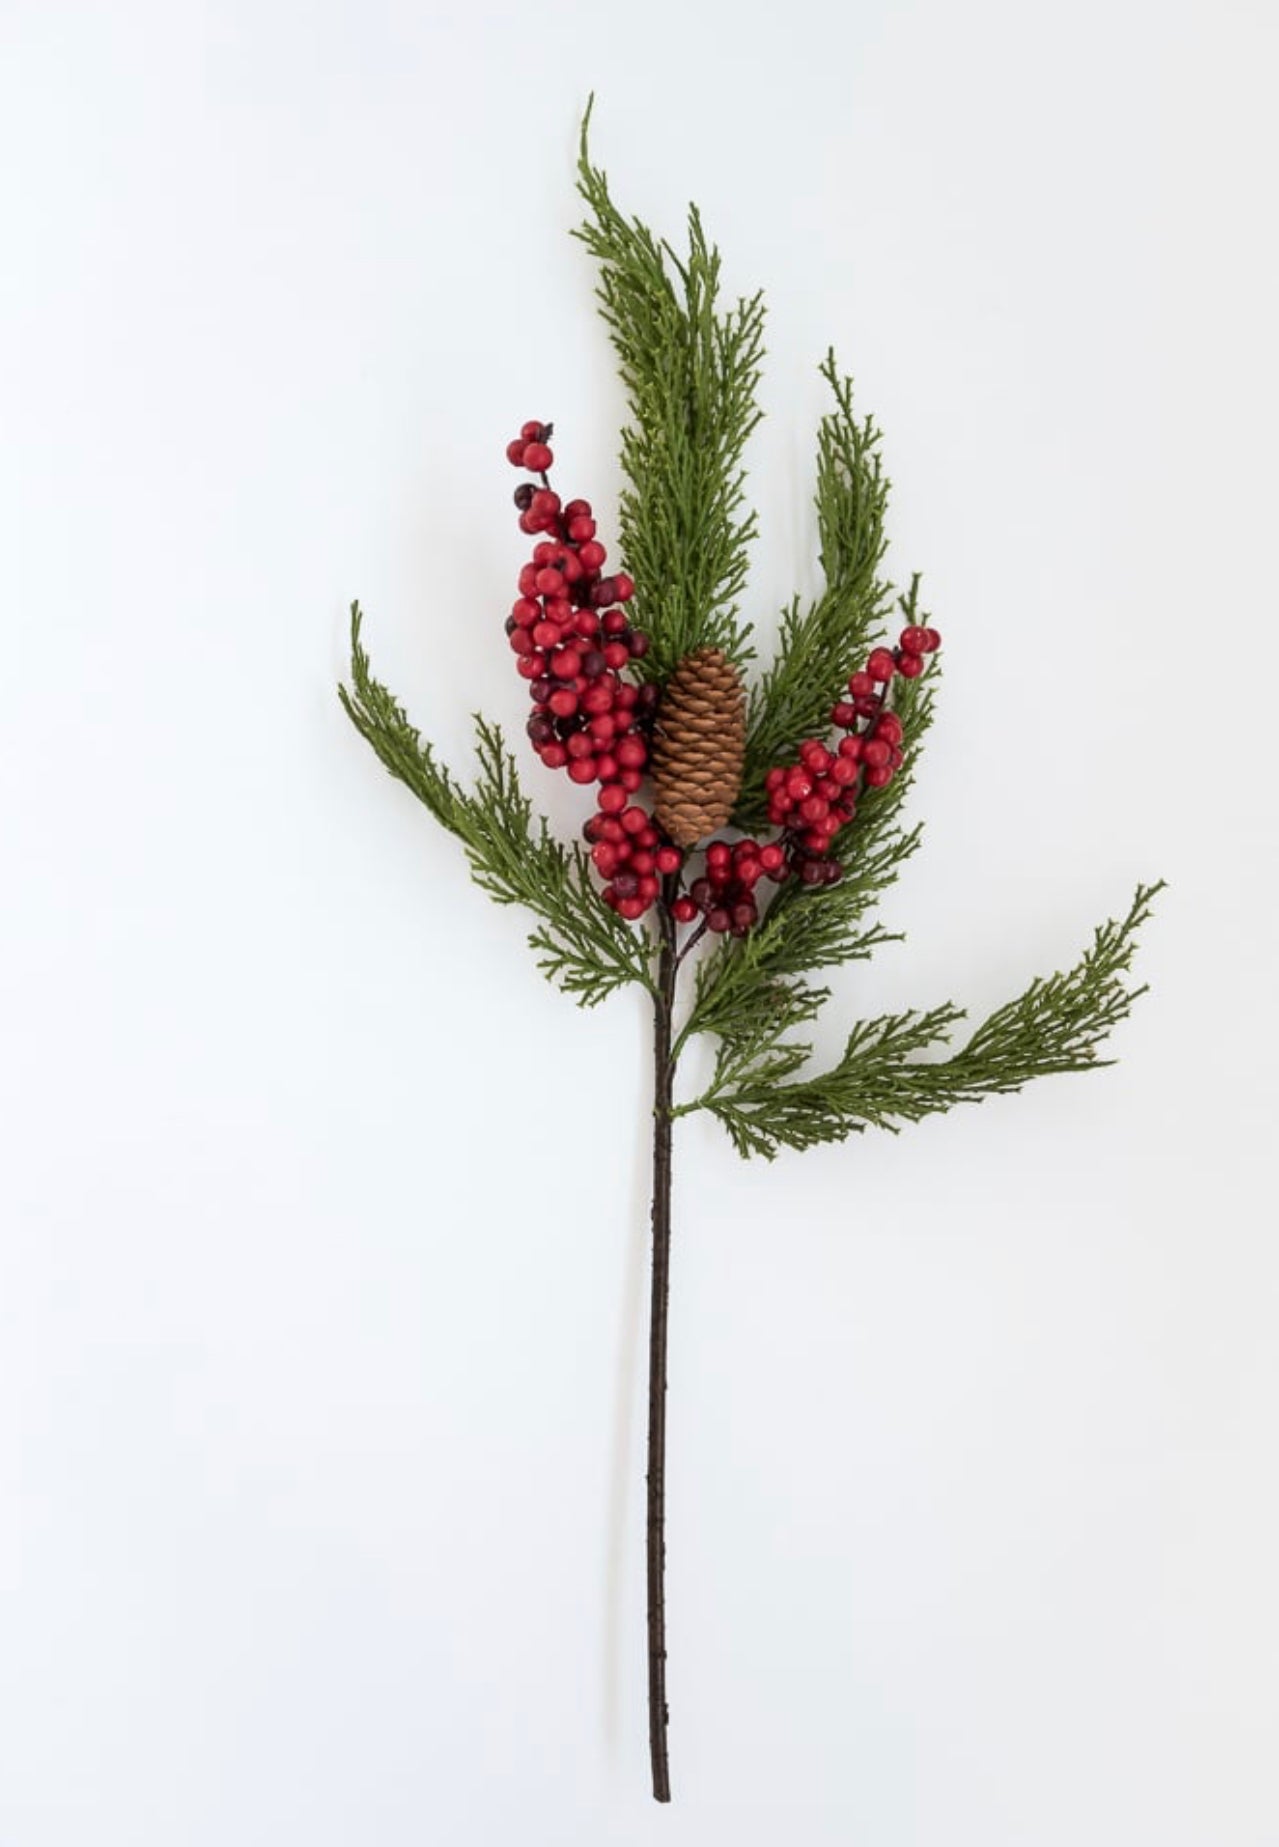 Artificial Pine Branches With Cone And Red Berries Stock Photo